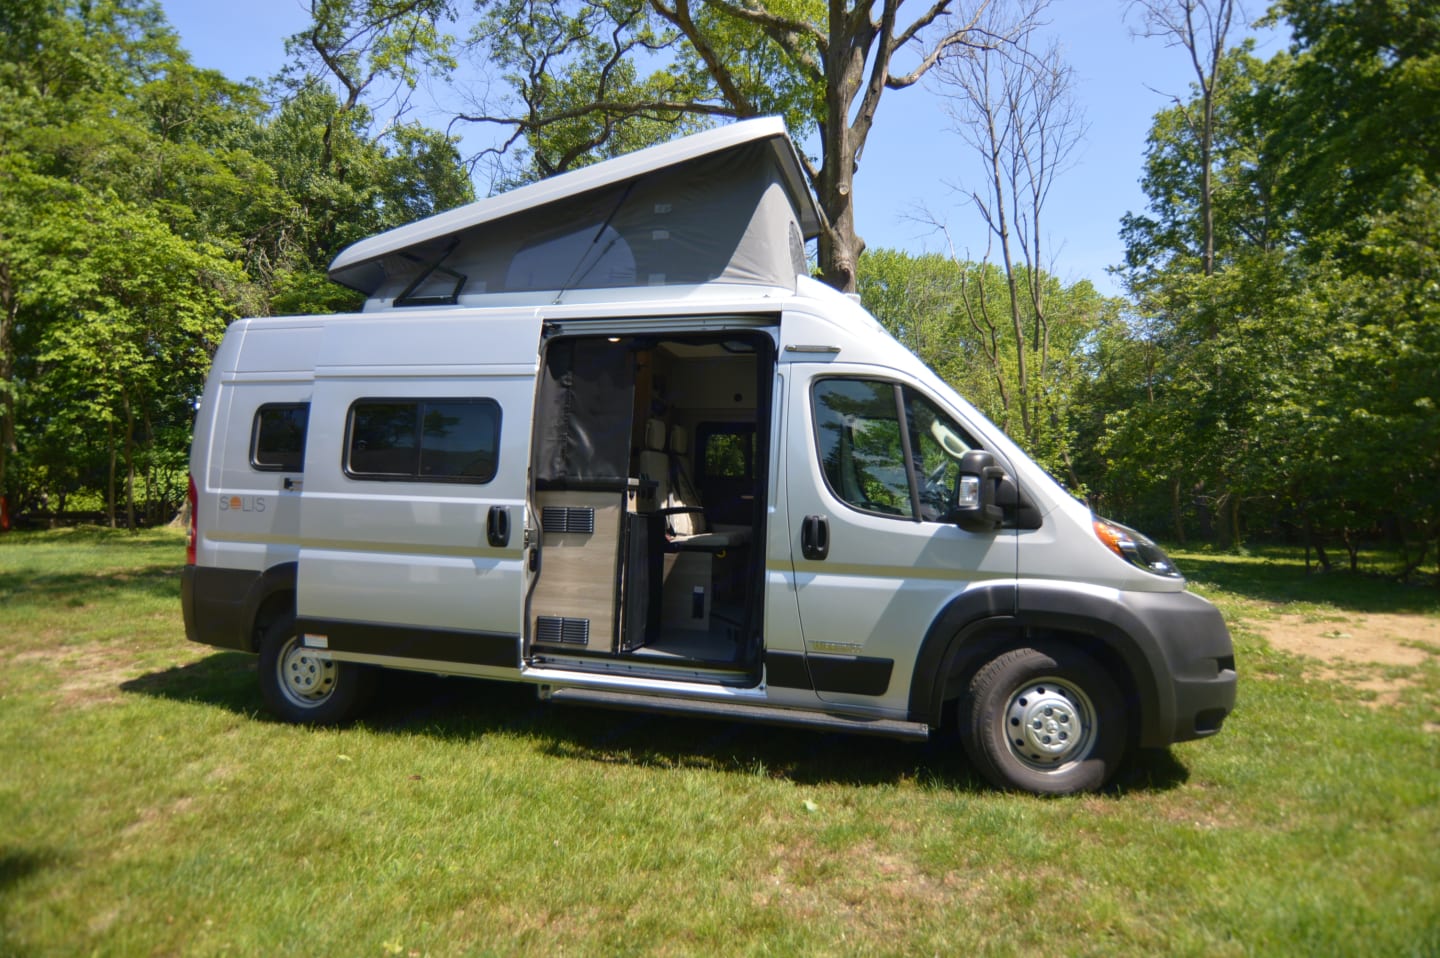 Campervan for rent near NYC